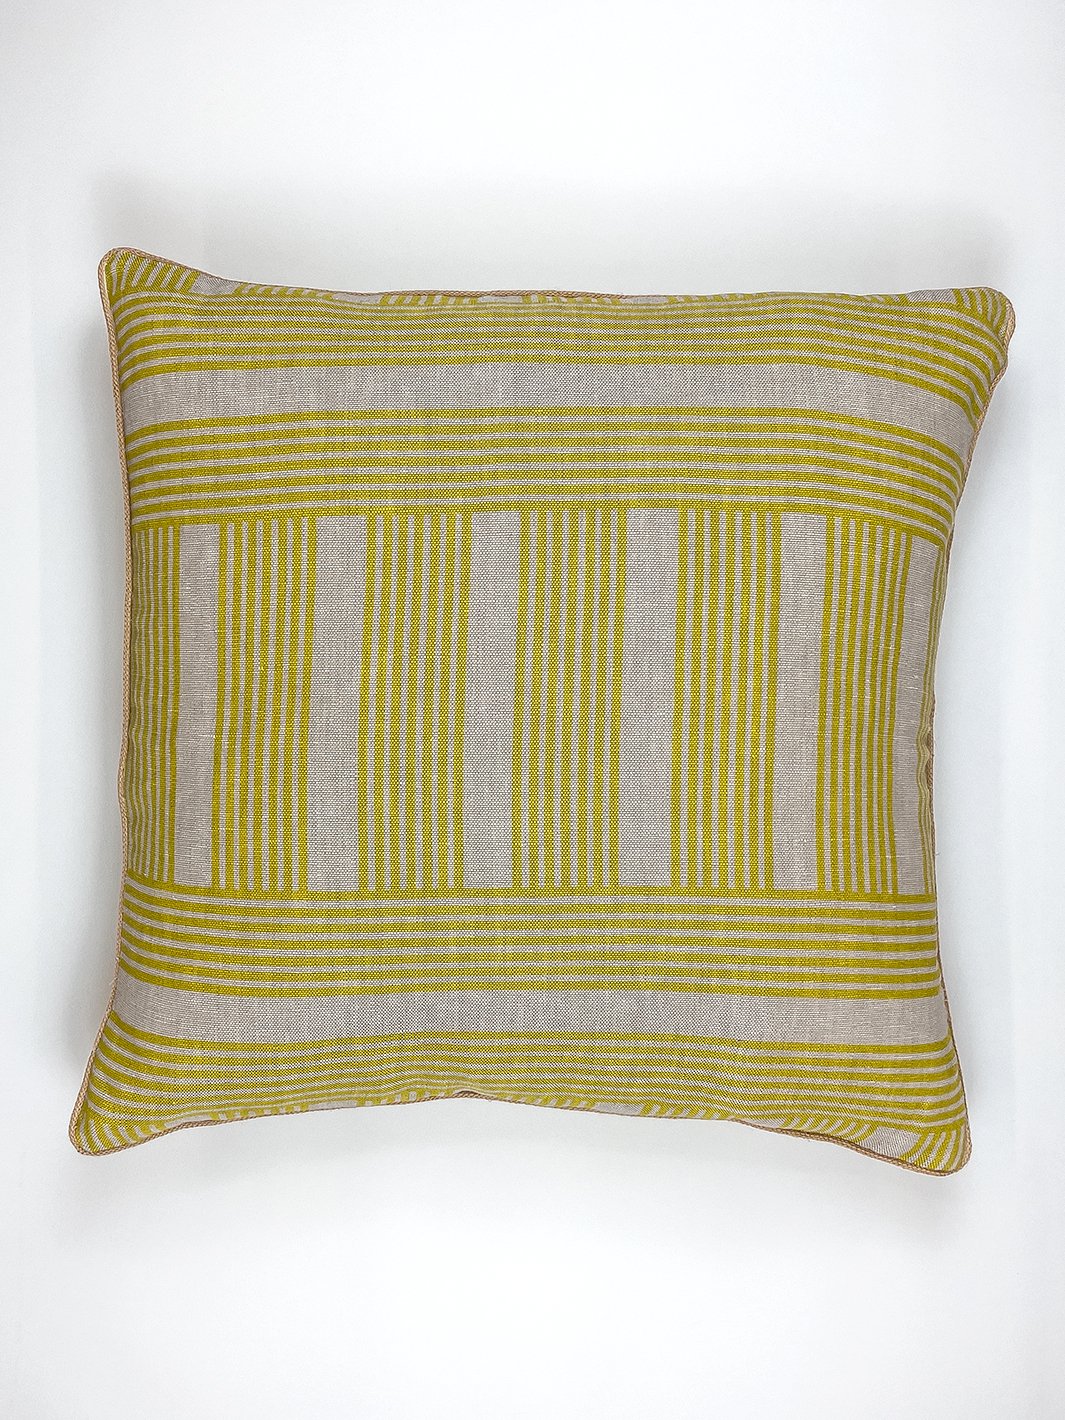 'Roman Holiday Grid' Throw Pillow by Barbie™ - Daffodil